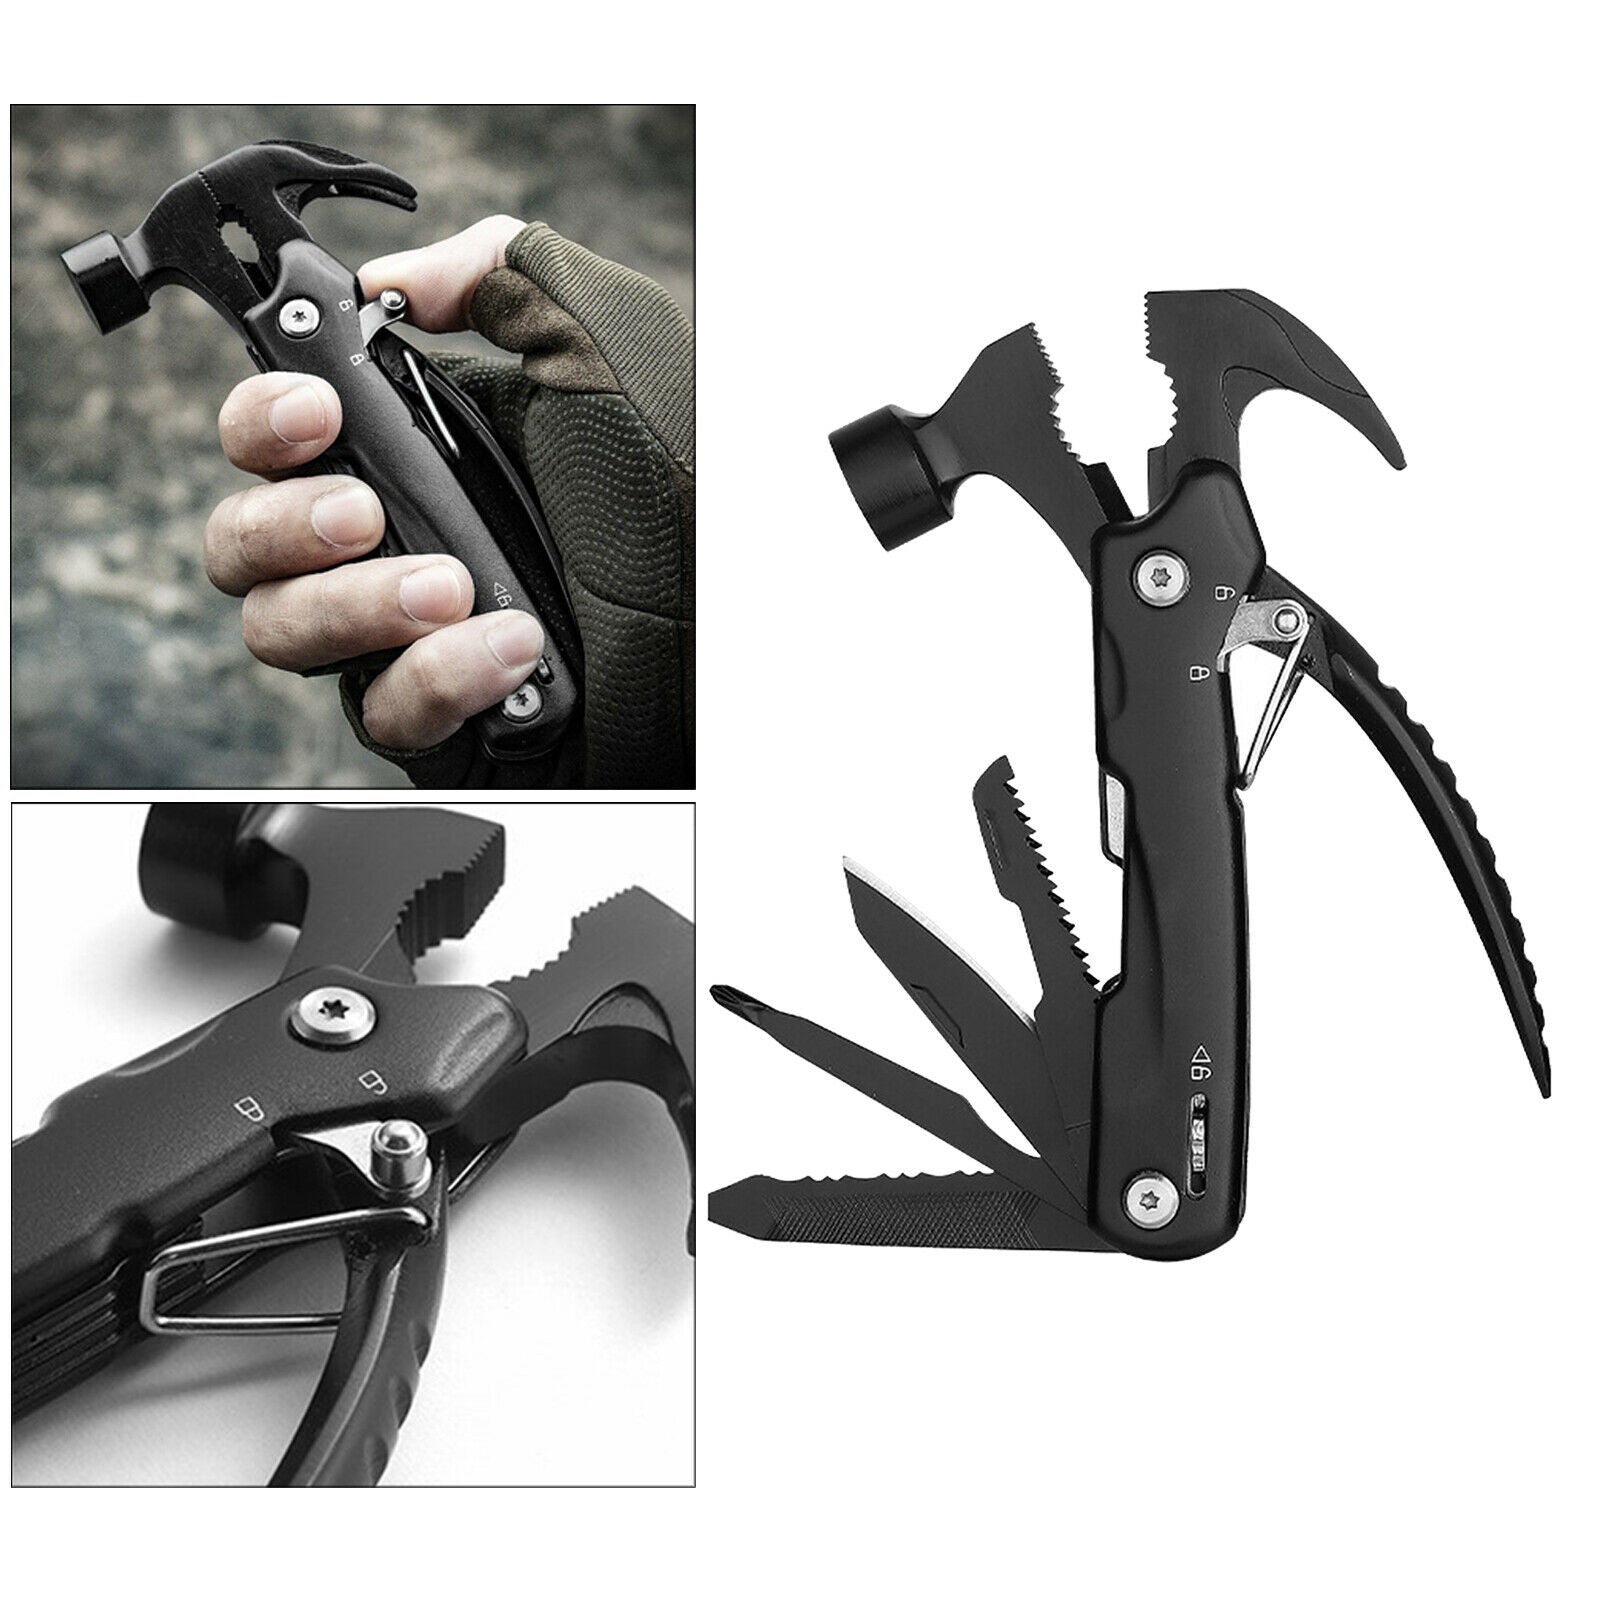 Stainless Steel Multitool Hammer Camping Survival Tools Gadgets Men Gifts